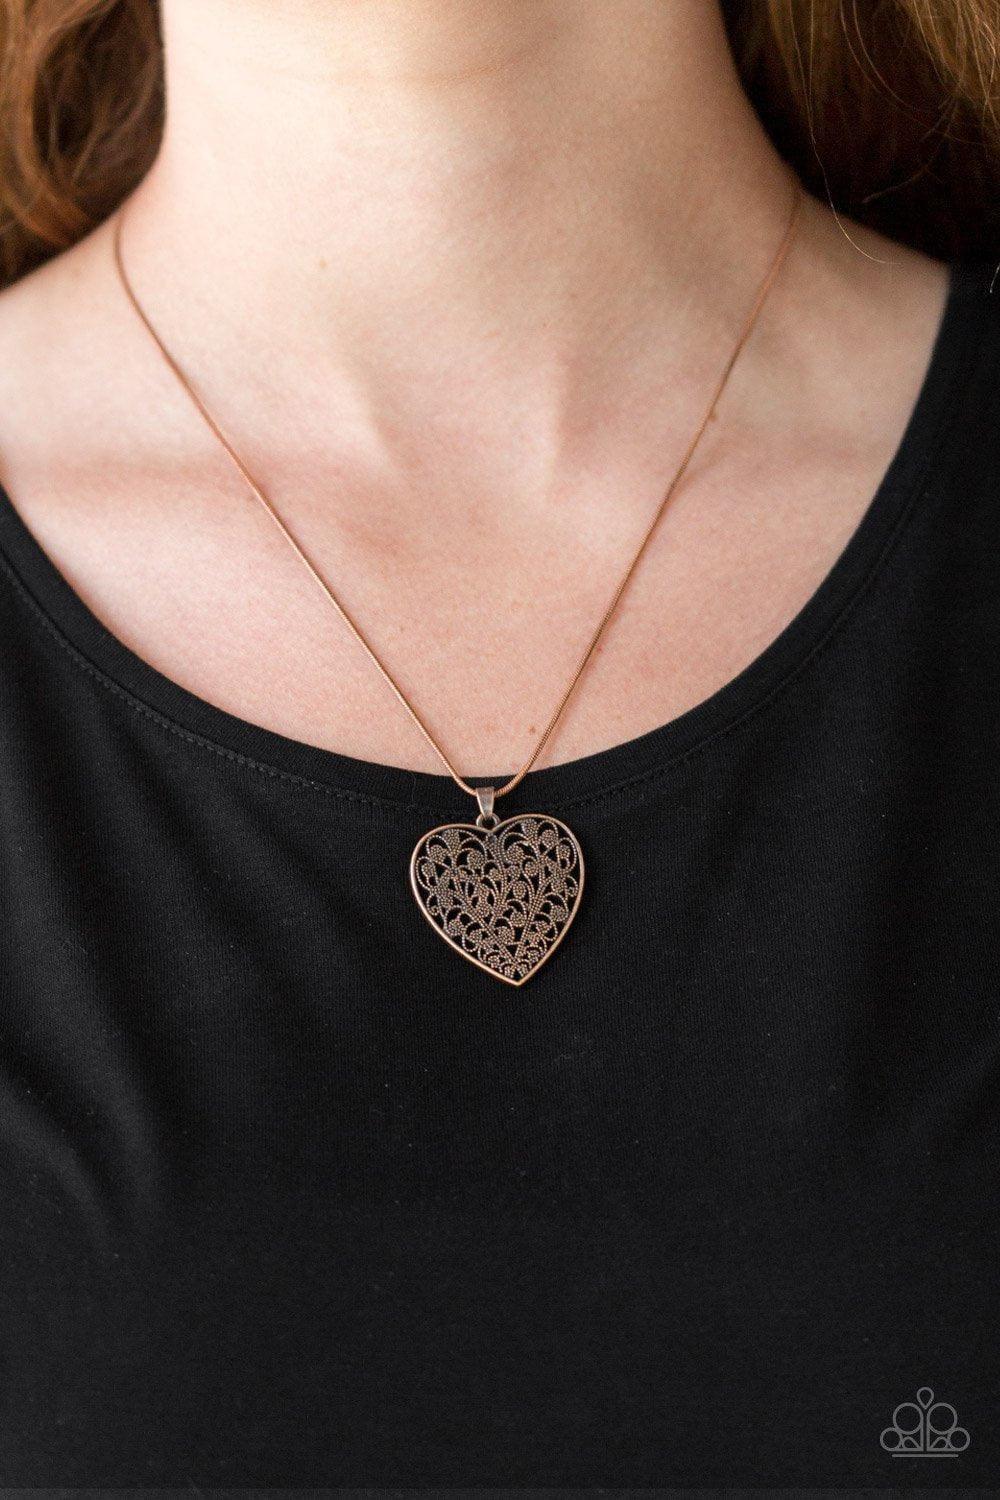 Paparazzi Accessories - Look Into Your Heart - Copper Necklace - Bling by JessieK